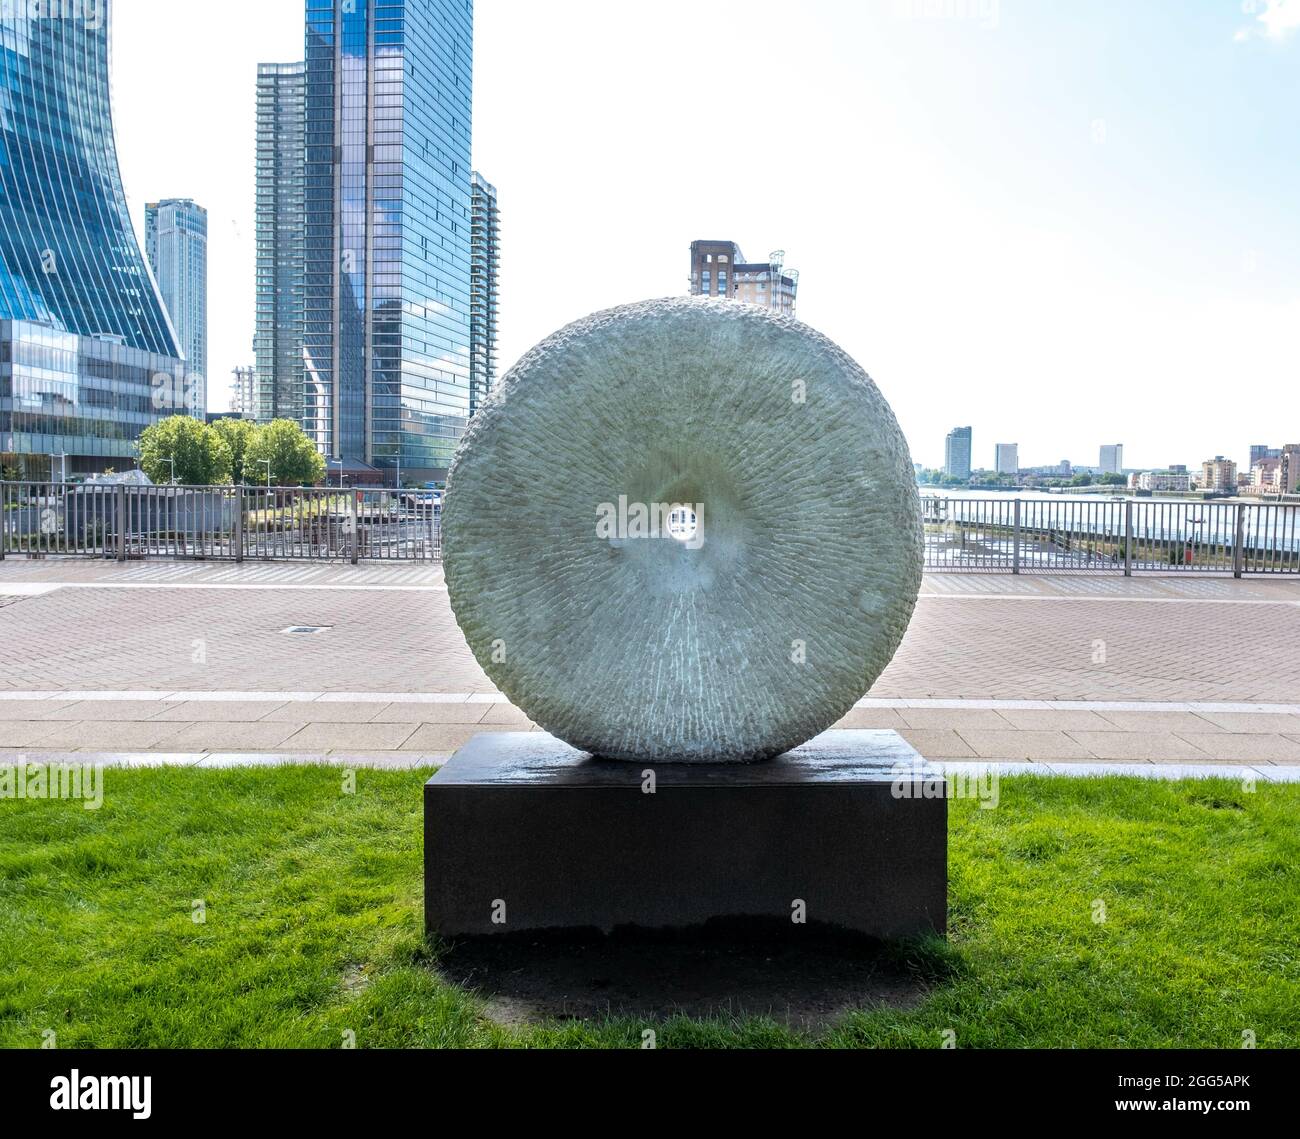 LONDON, UNITED KINGDOM - Aug 10, 2021: The sculpture Vanishing Point by Jay Battle in Westferry Circus, Canary Wharf, London, UK Stock Photo